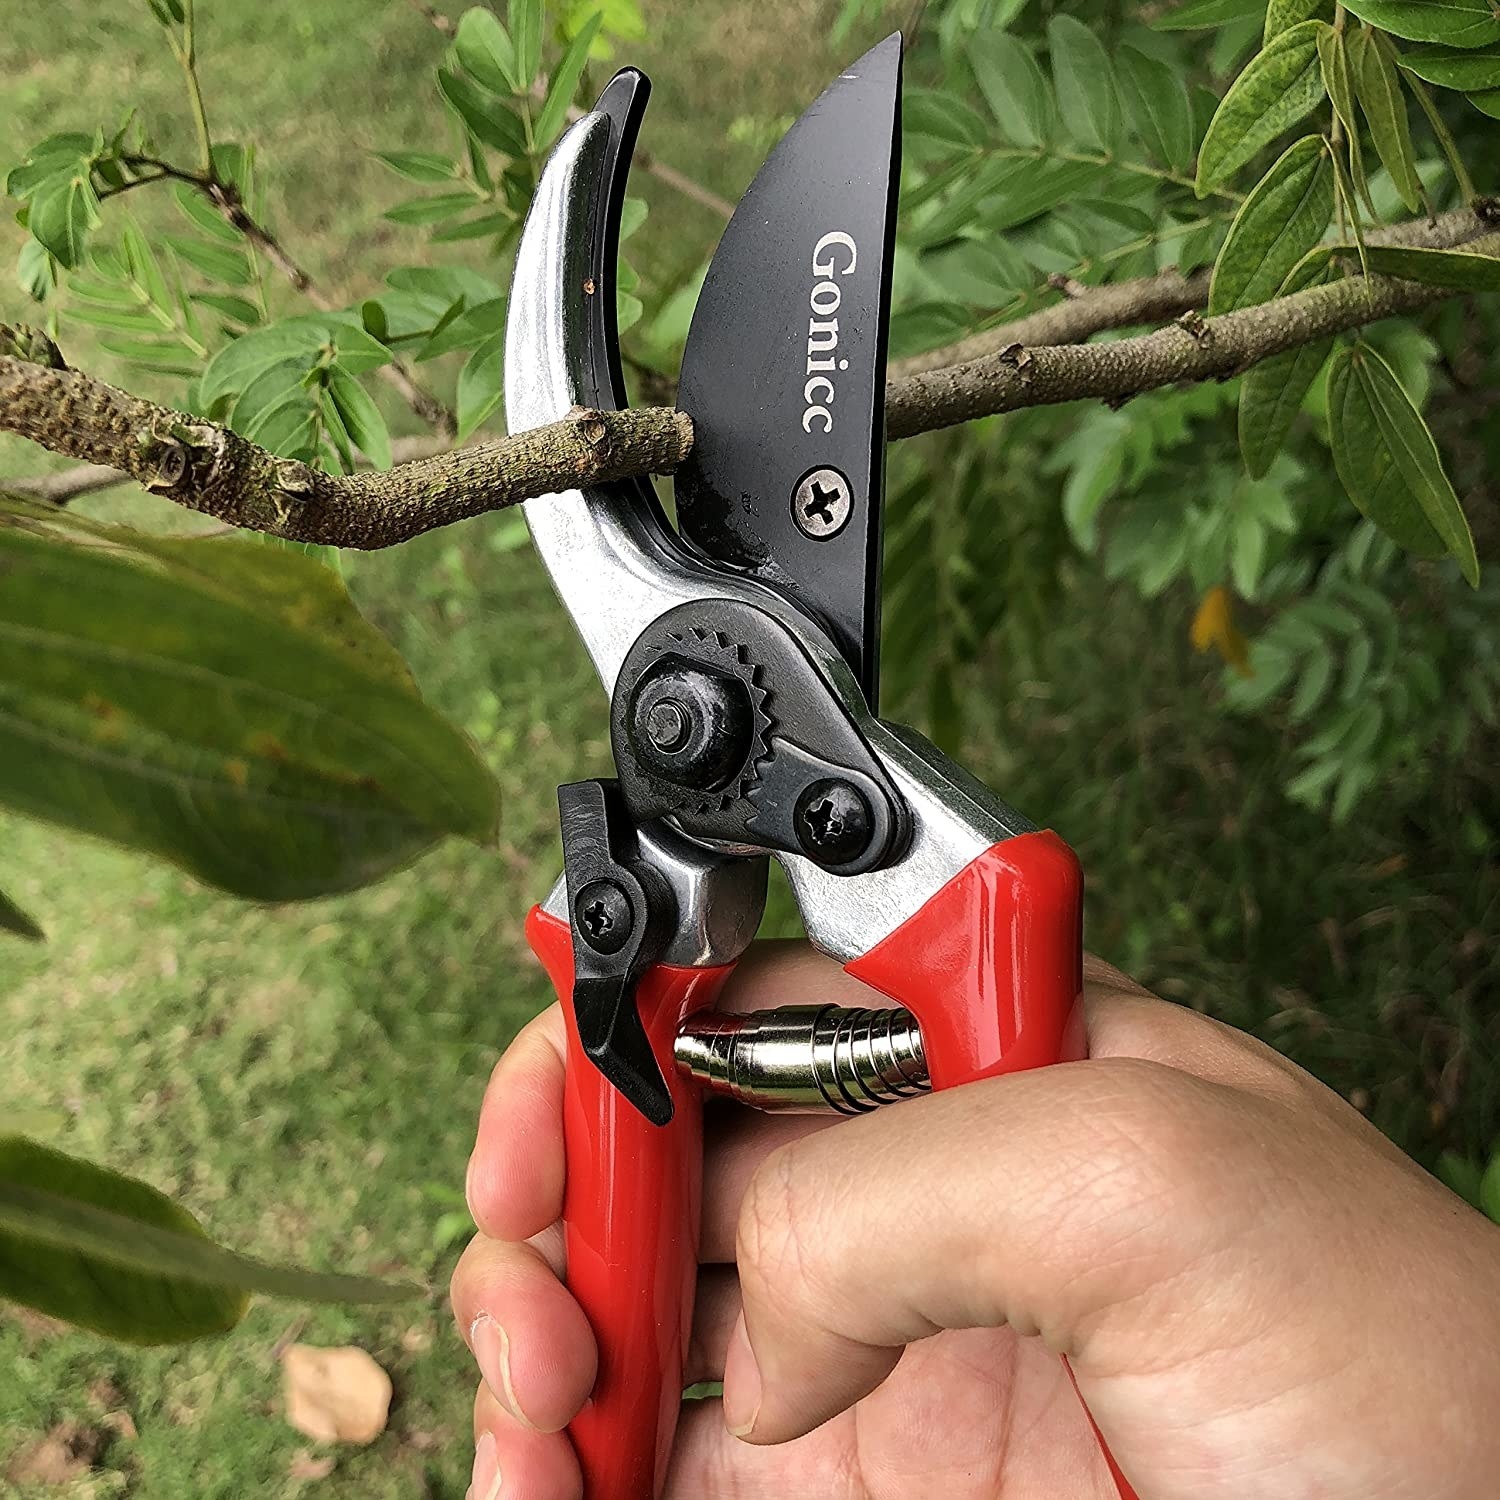 A person using the shears to trim a branch